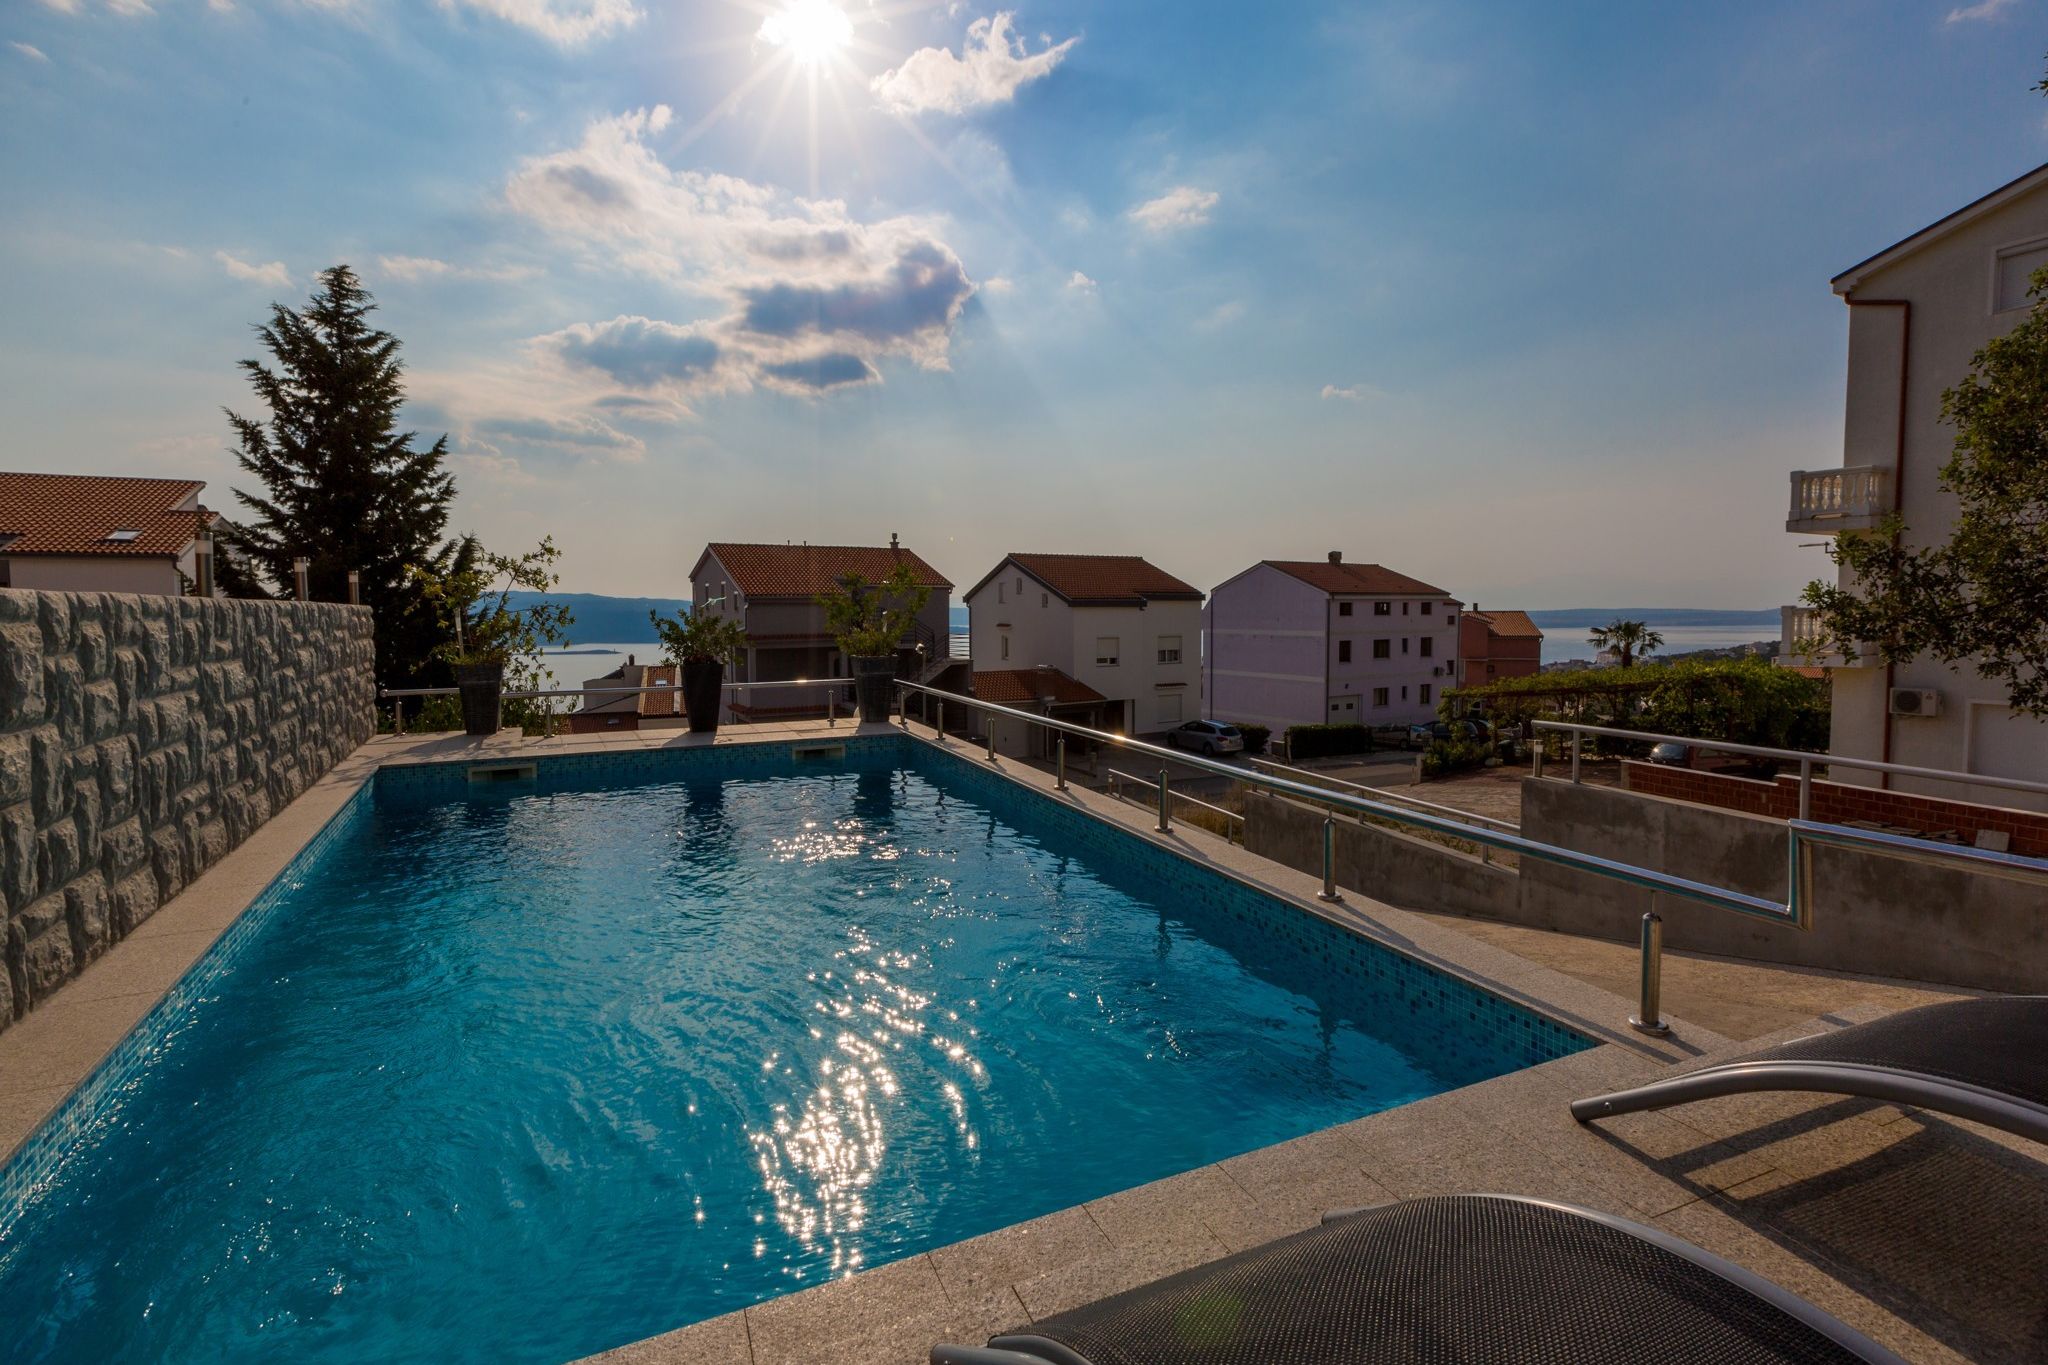 Vibrant Apartment in Crikvenica with Shared Pool